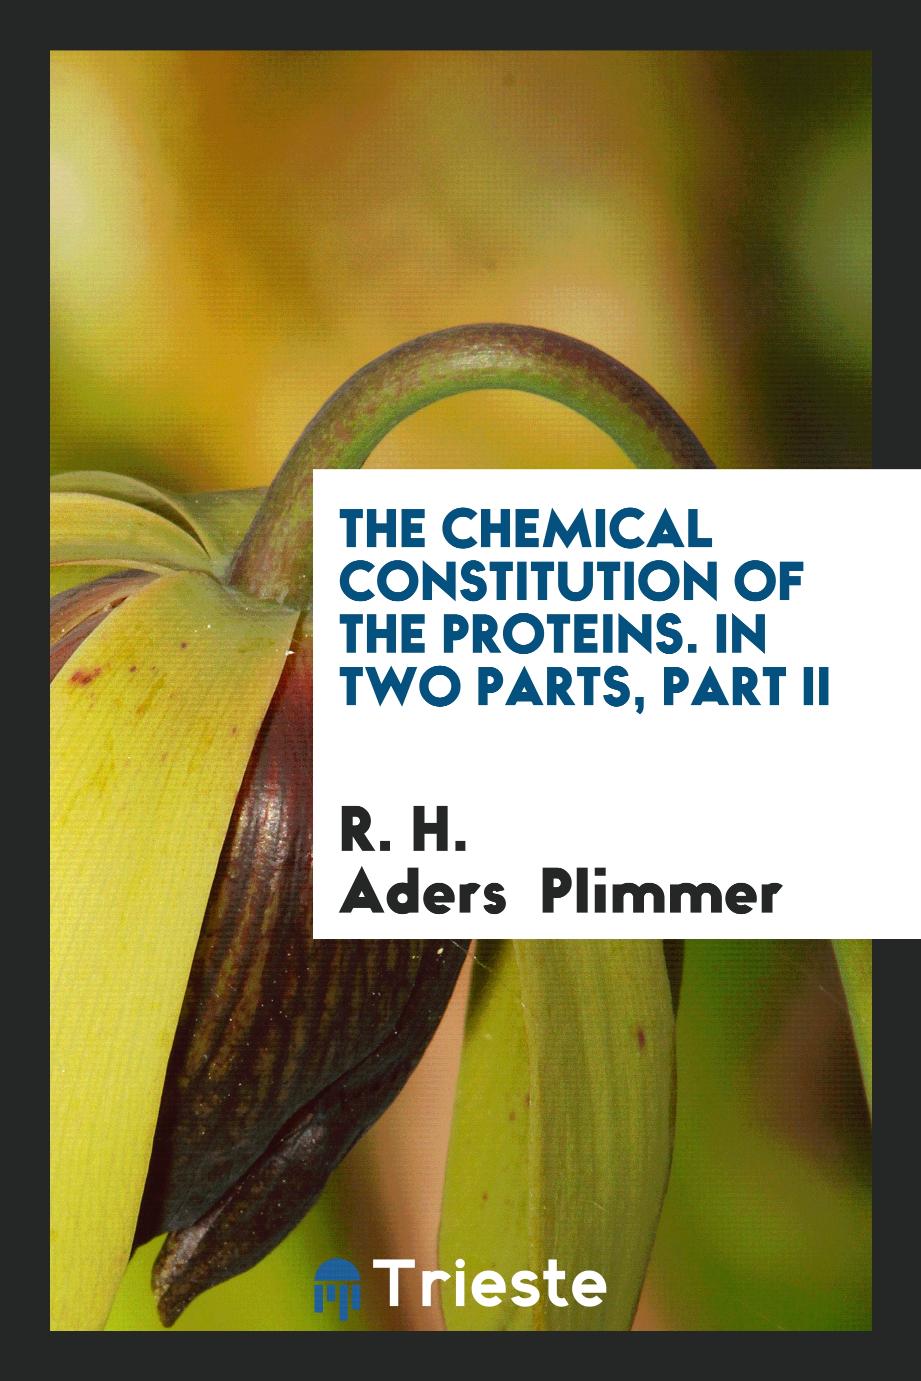 The Chemical Constitution of the Proteins. In Two Parts, Part II